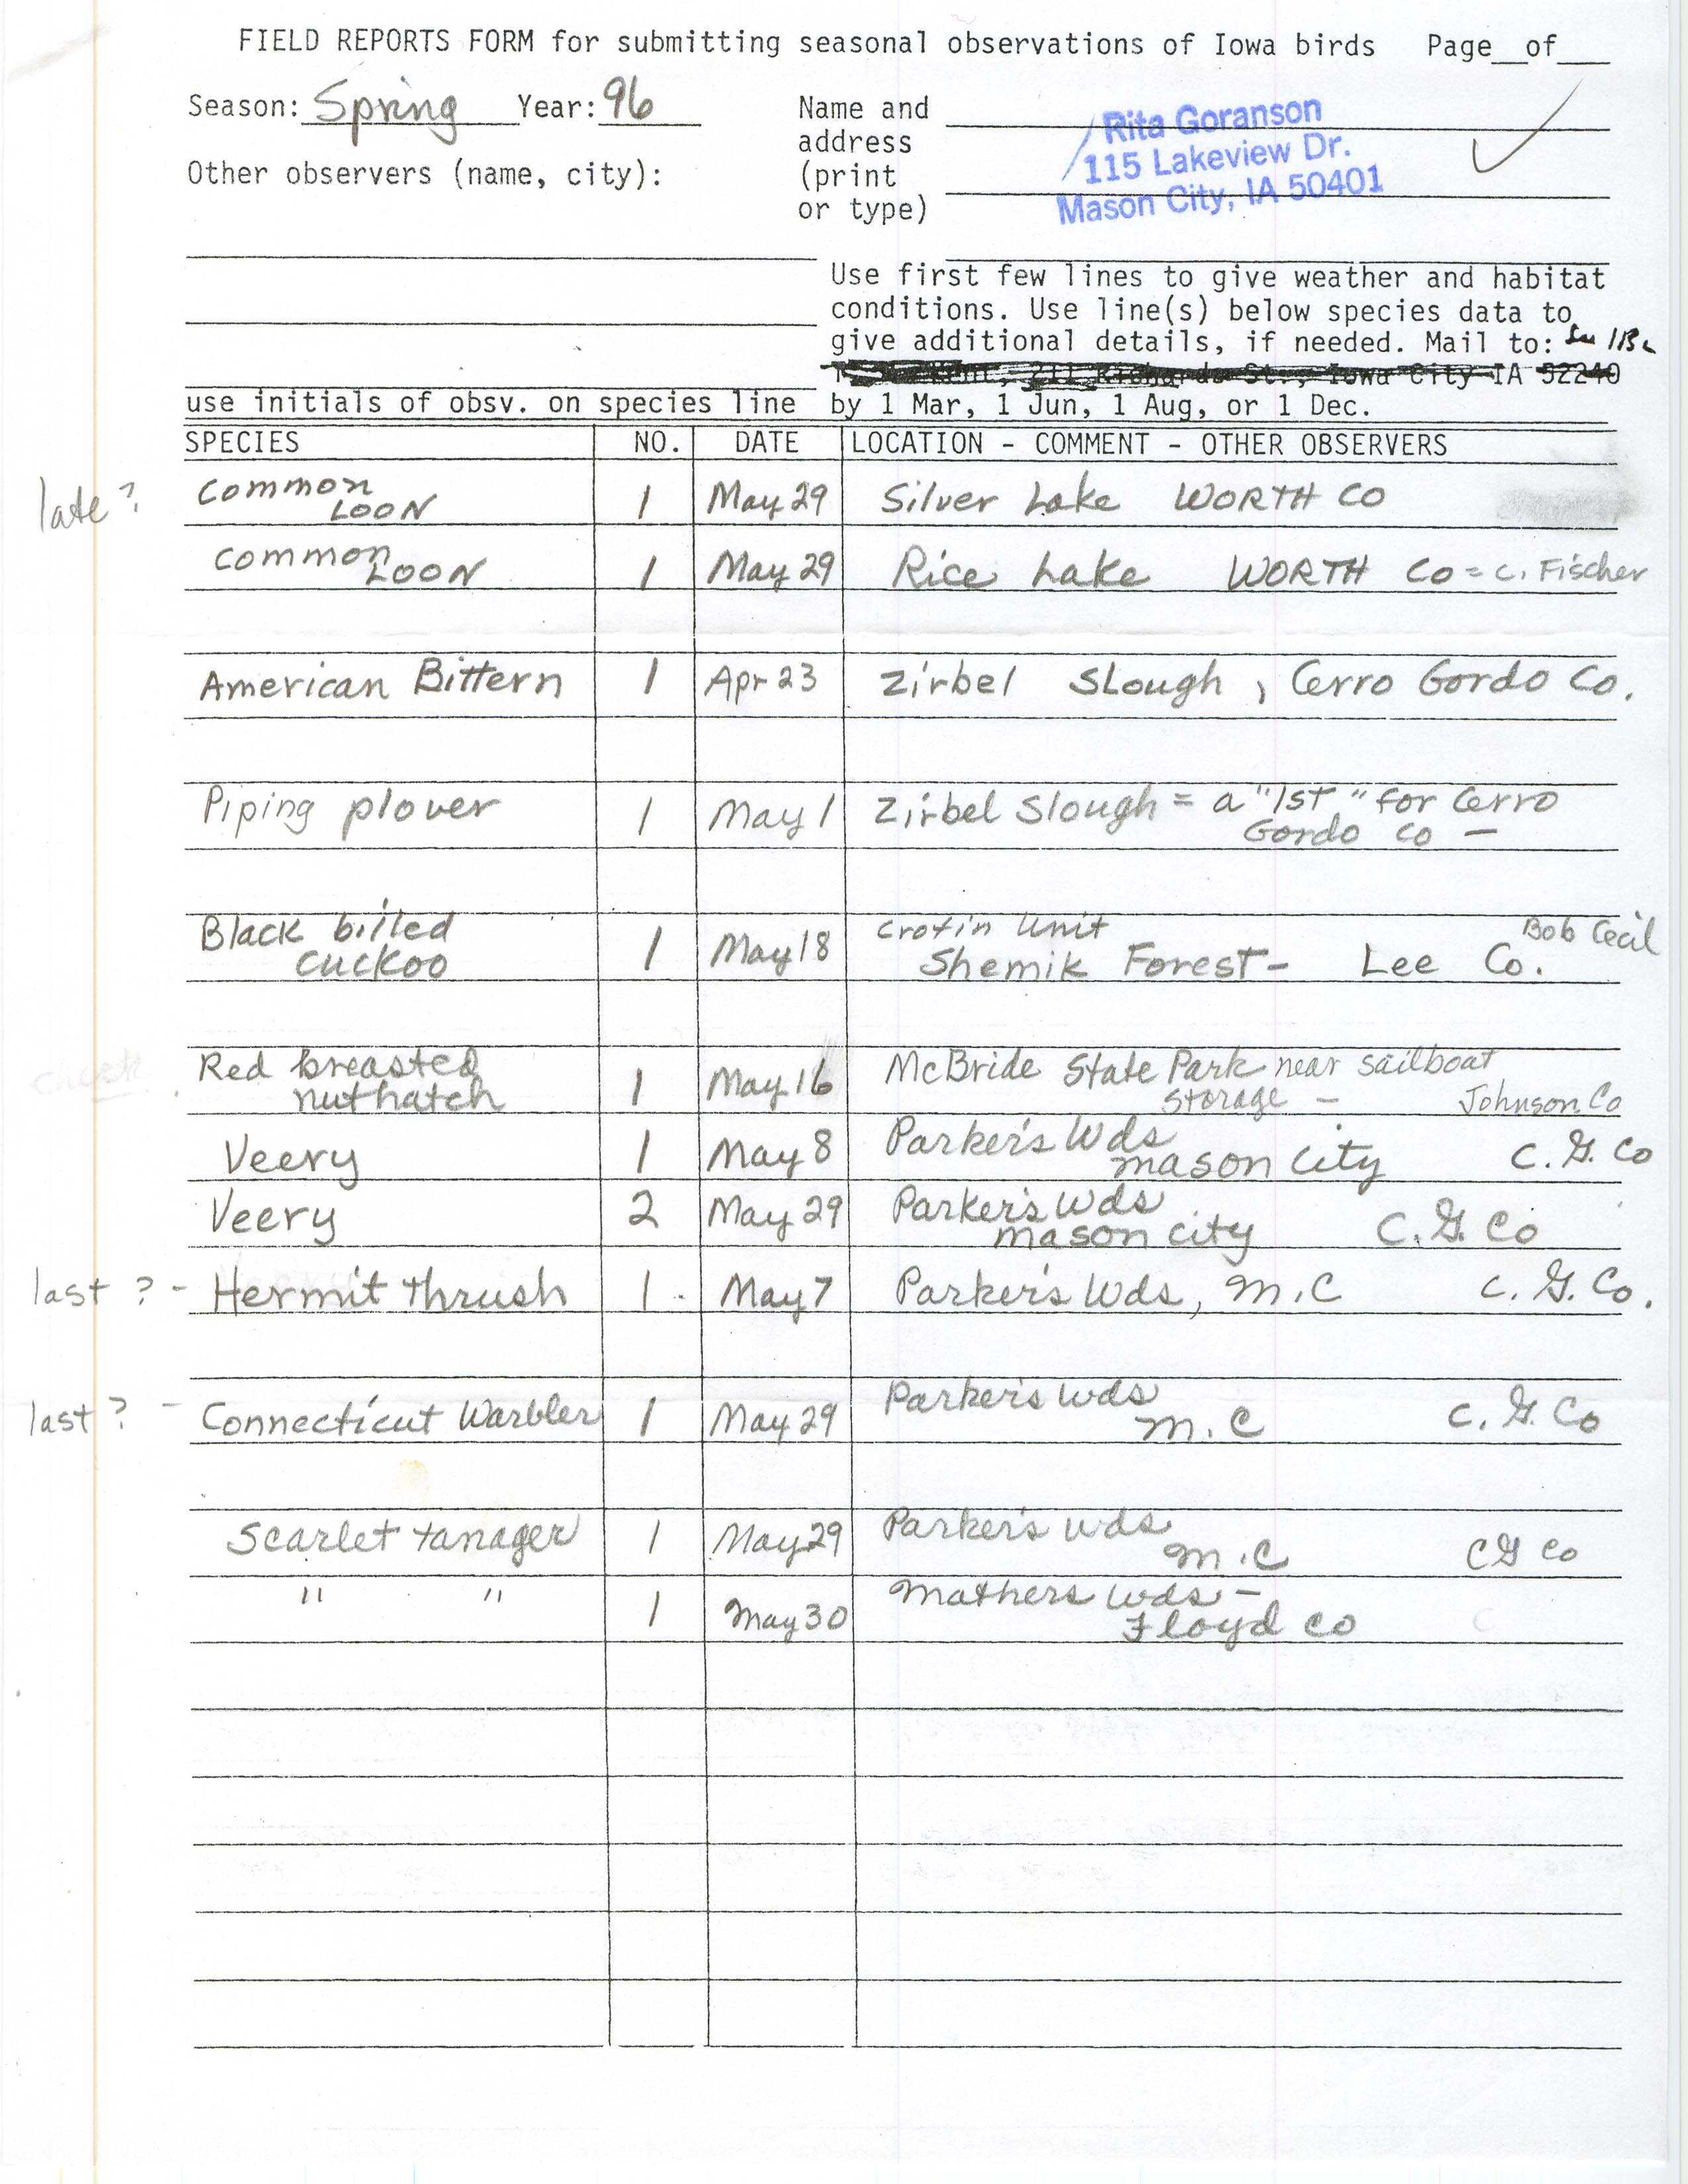 Field reports form for submitting seasonal observations of Iowa birds, Rita Goranson, spring 1996